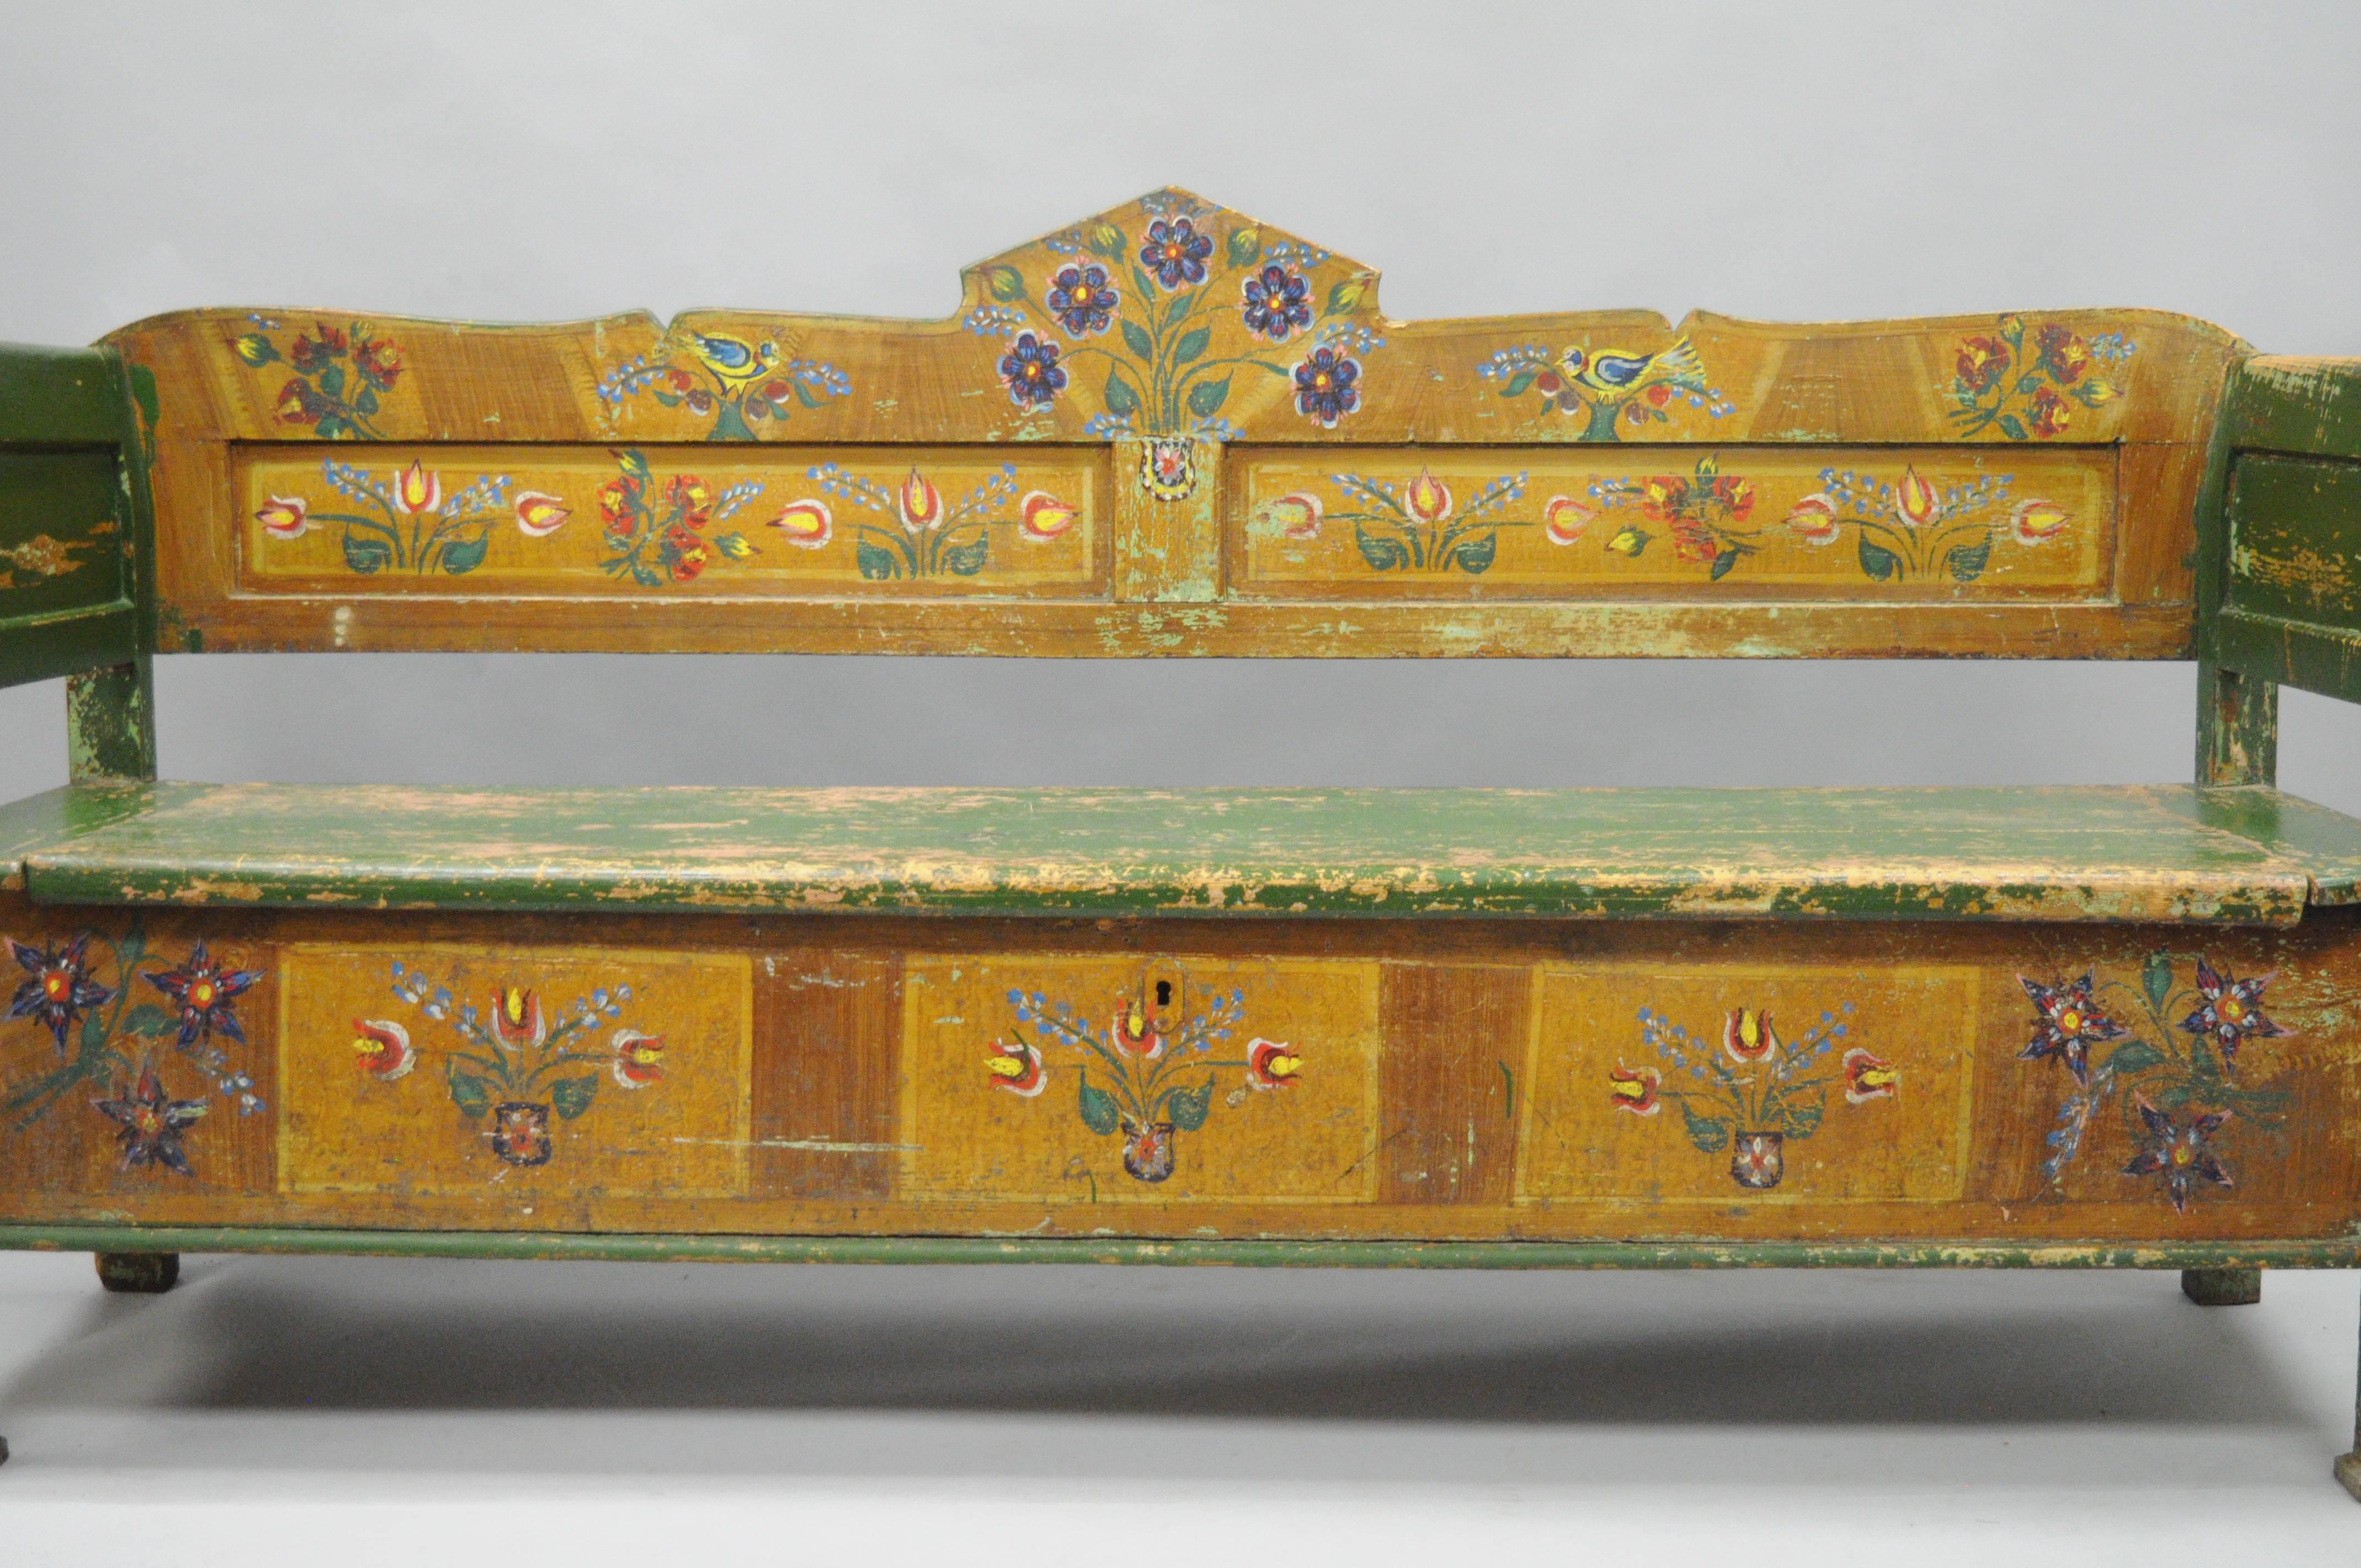 7" foot long antique distress painted green & yellow primitive rustic entry bench with flip seat storage. Item features a weathered green and yellow hand-painted finish with multi colored bird and flower details. Bench further features a